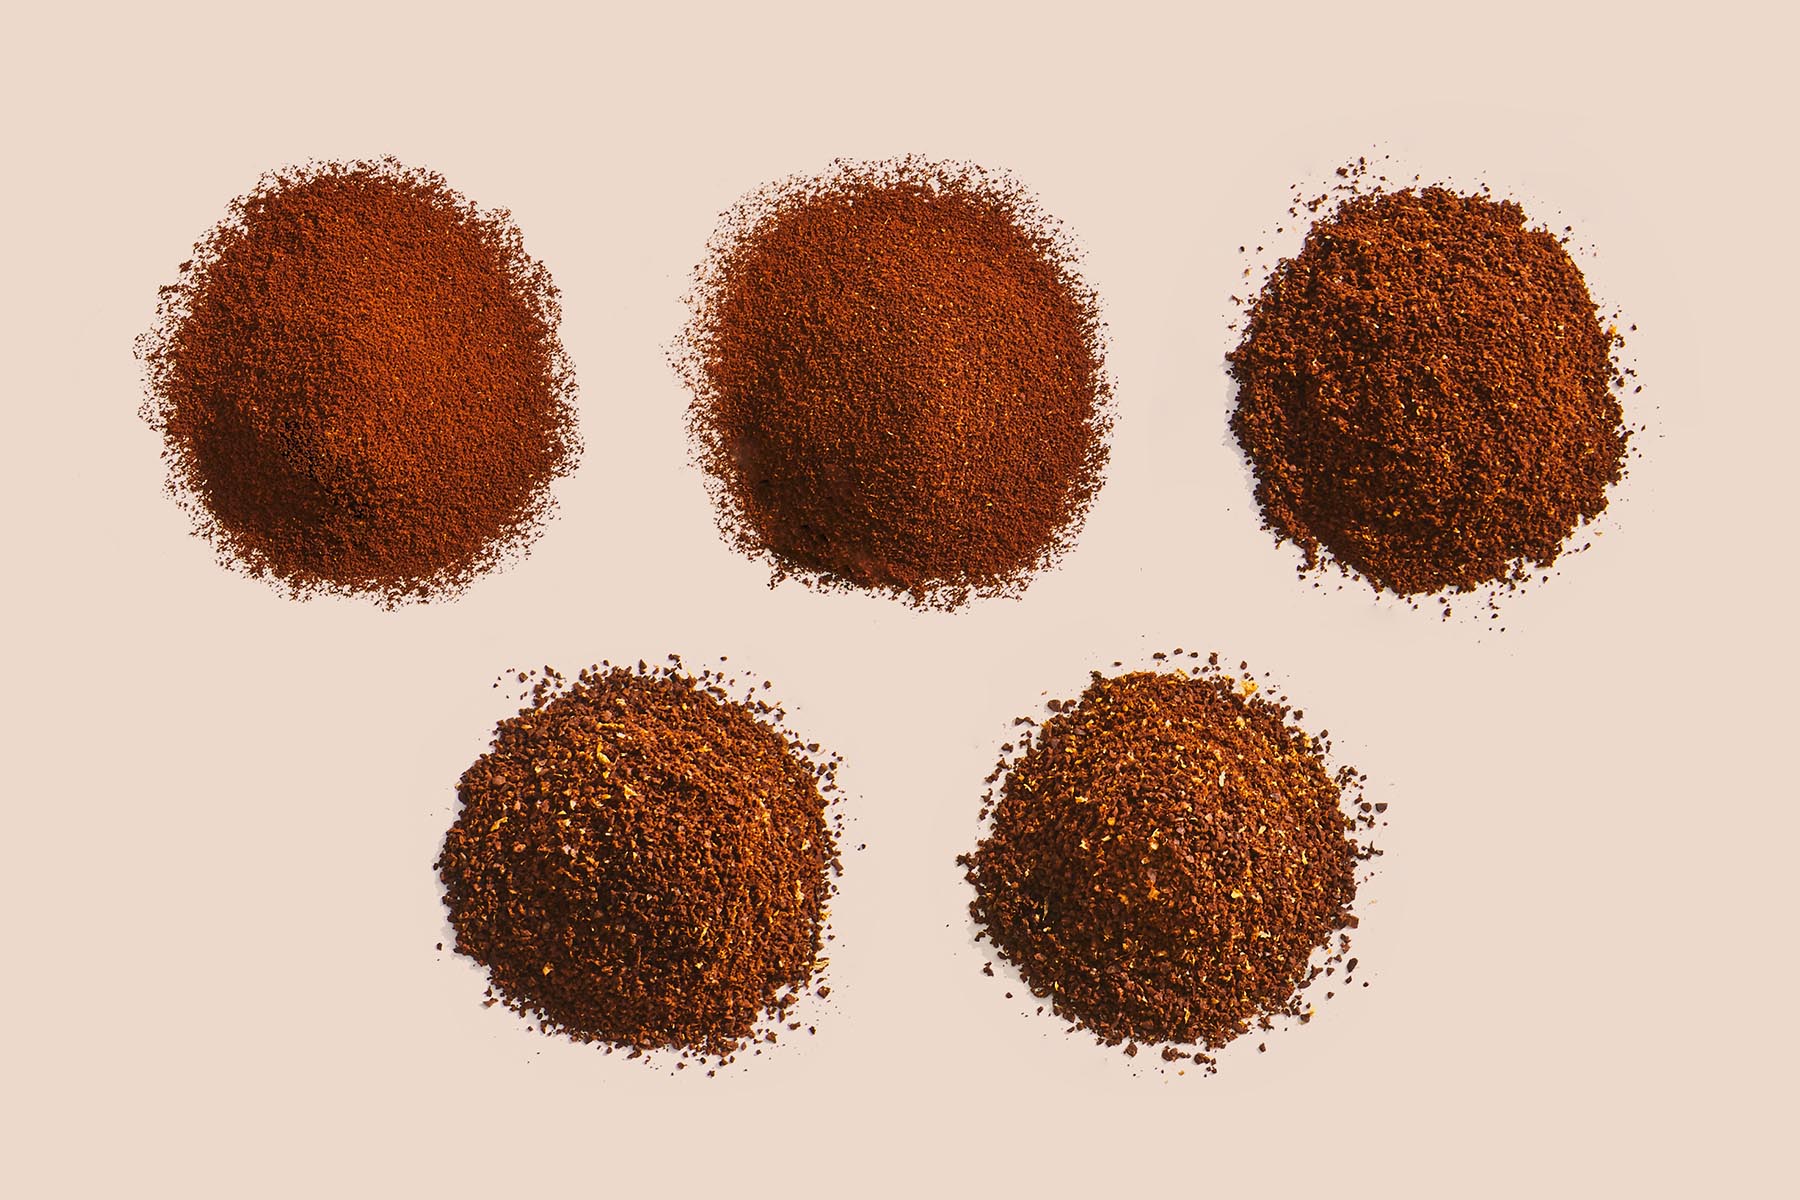 Is It Better To Grind Coffee Coarse or Fine?